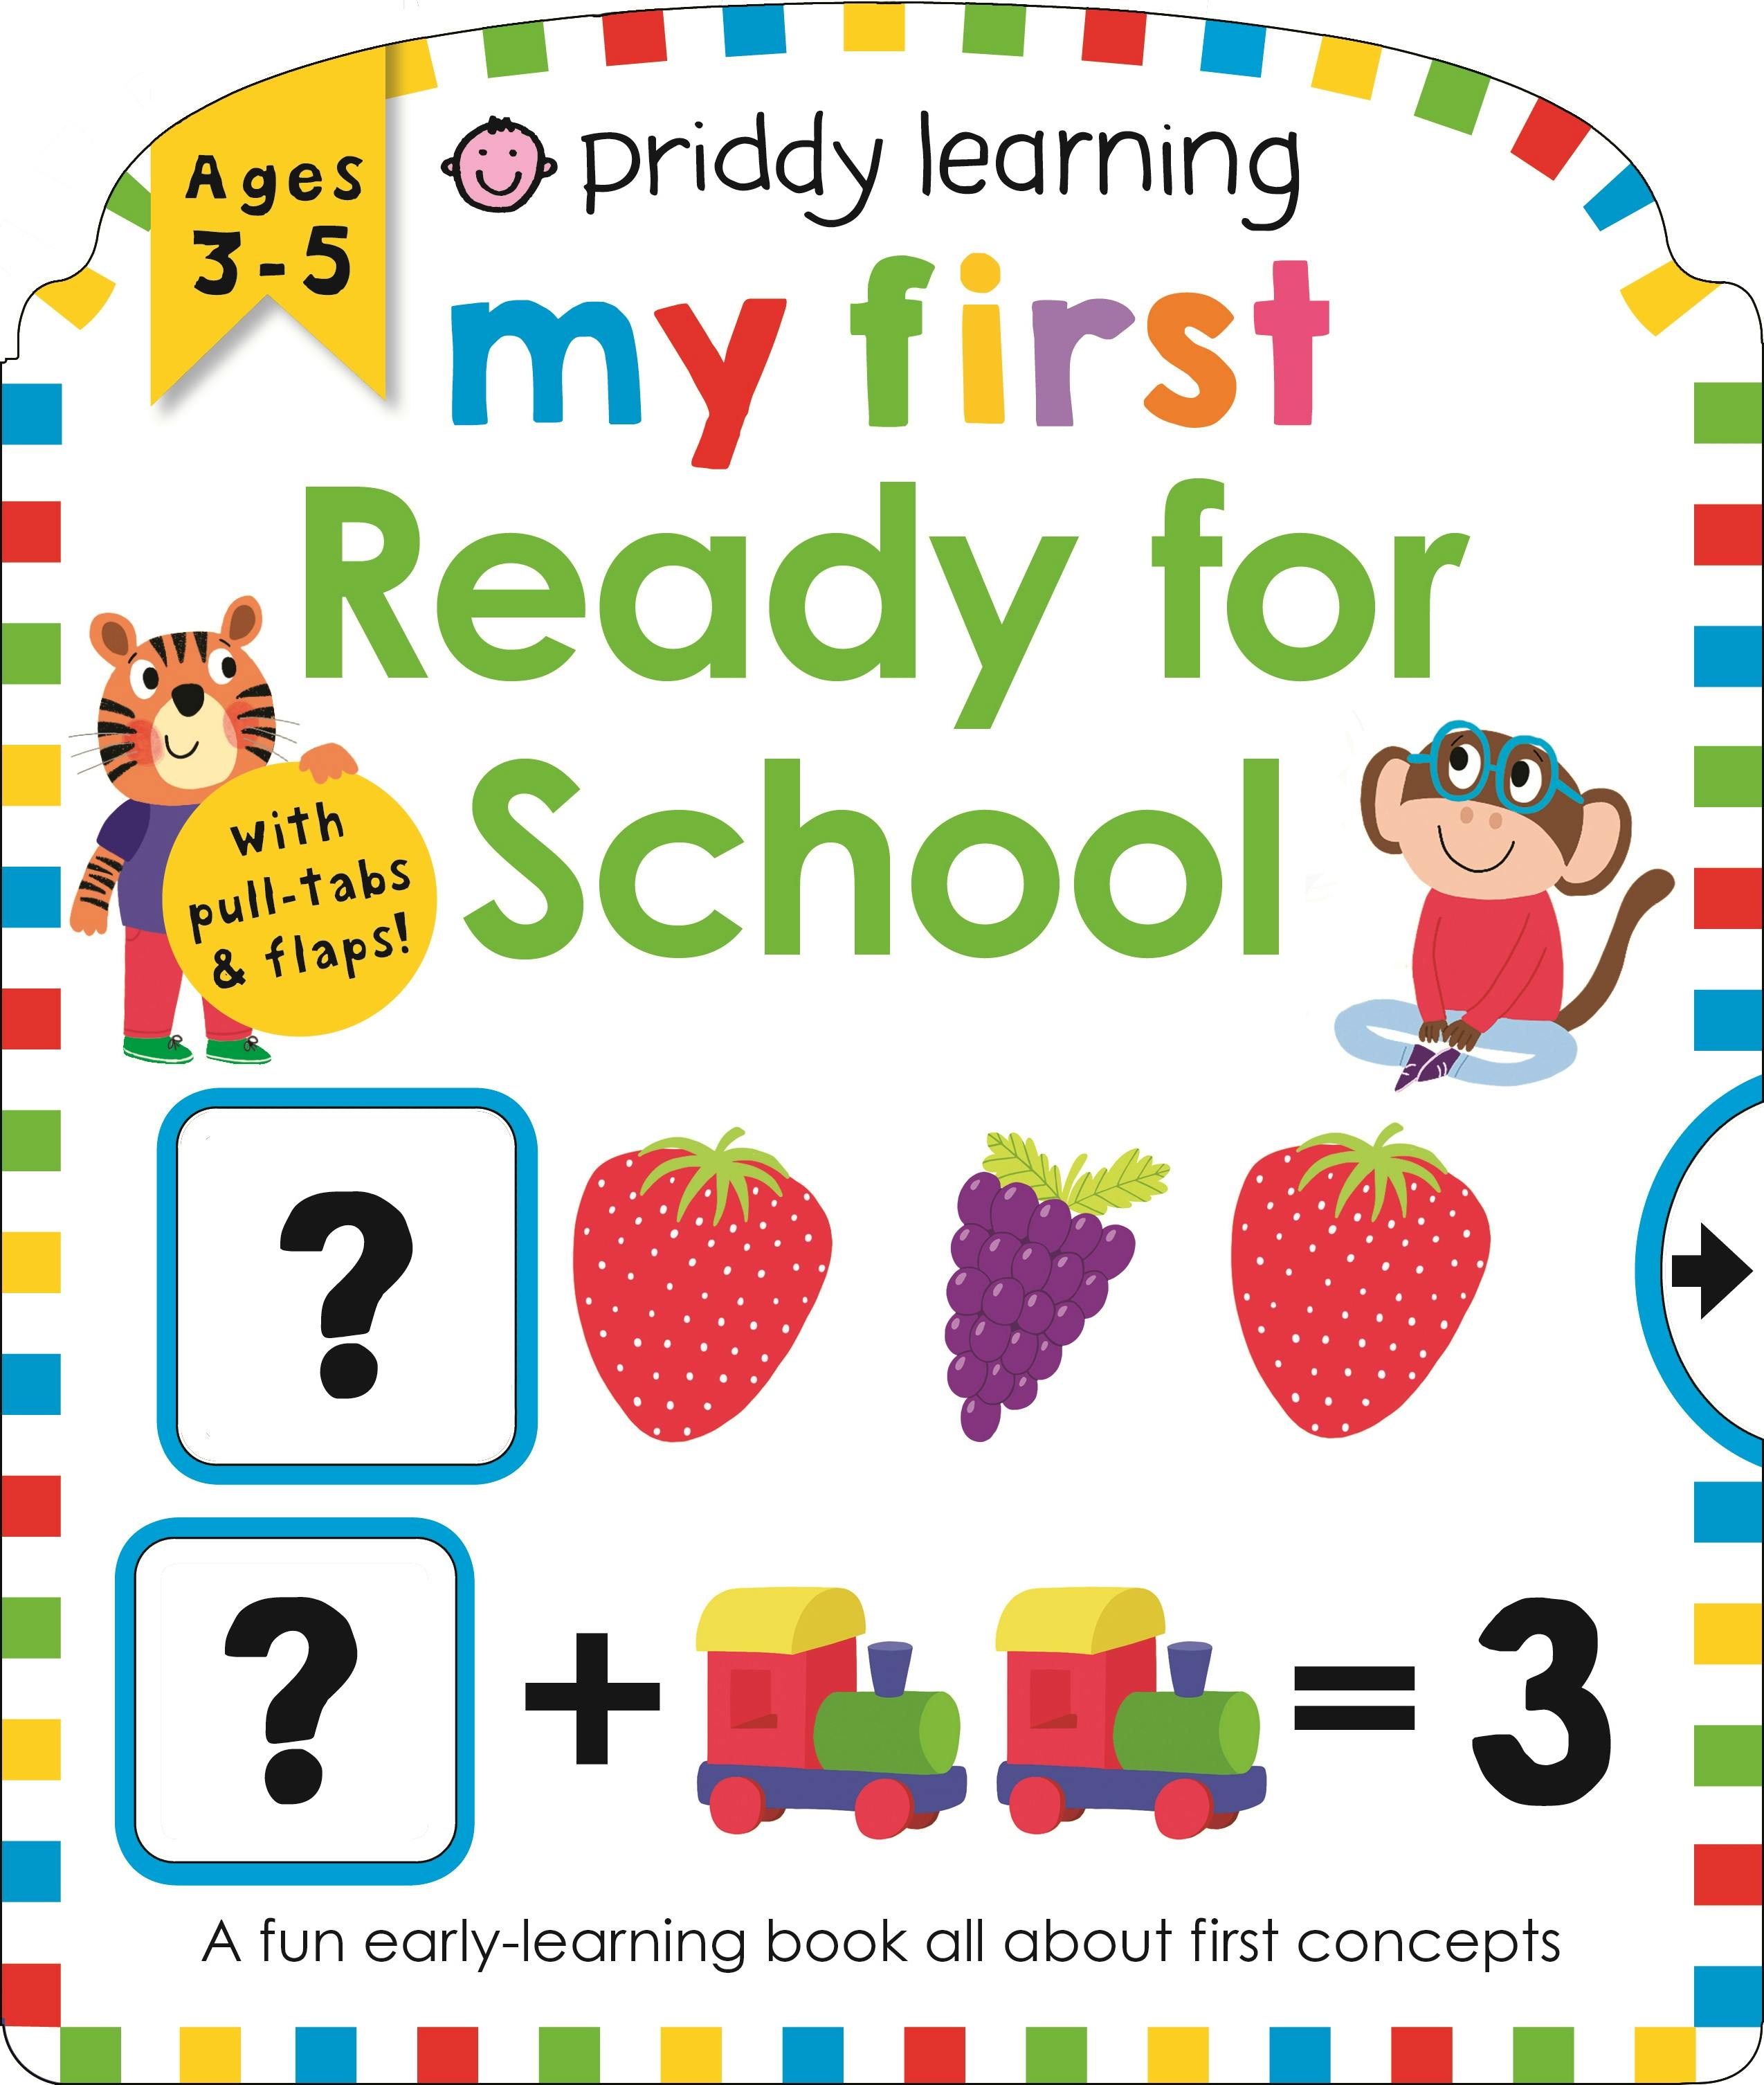 Ready for first book. Priddy r. "first 100 numbers". Ready for first